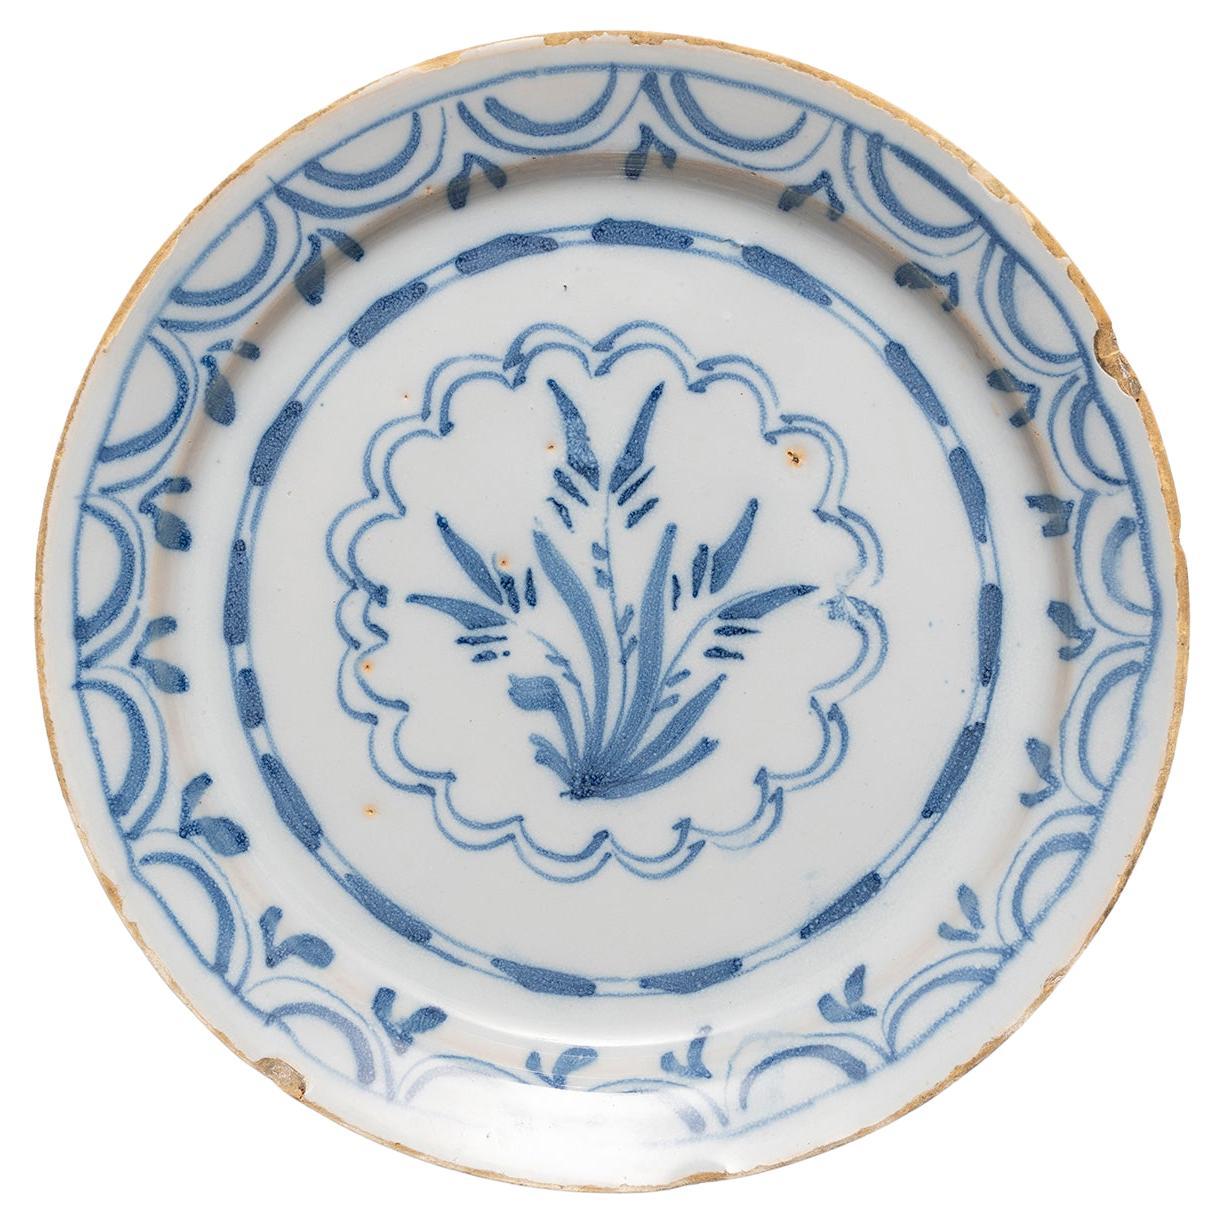 Plate Delftware, English Small Stylised Floral Spray London, Blue and White